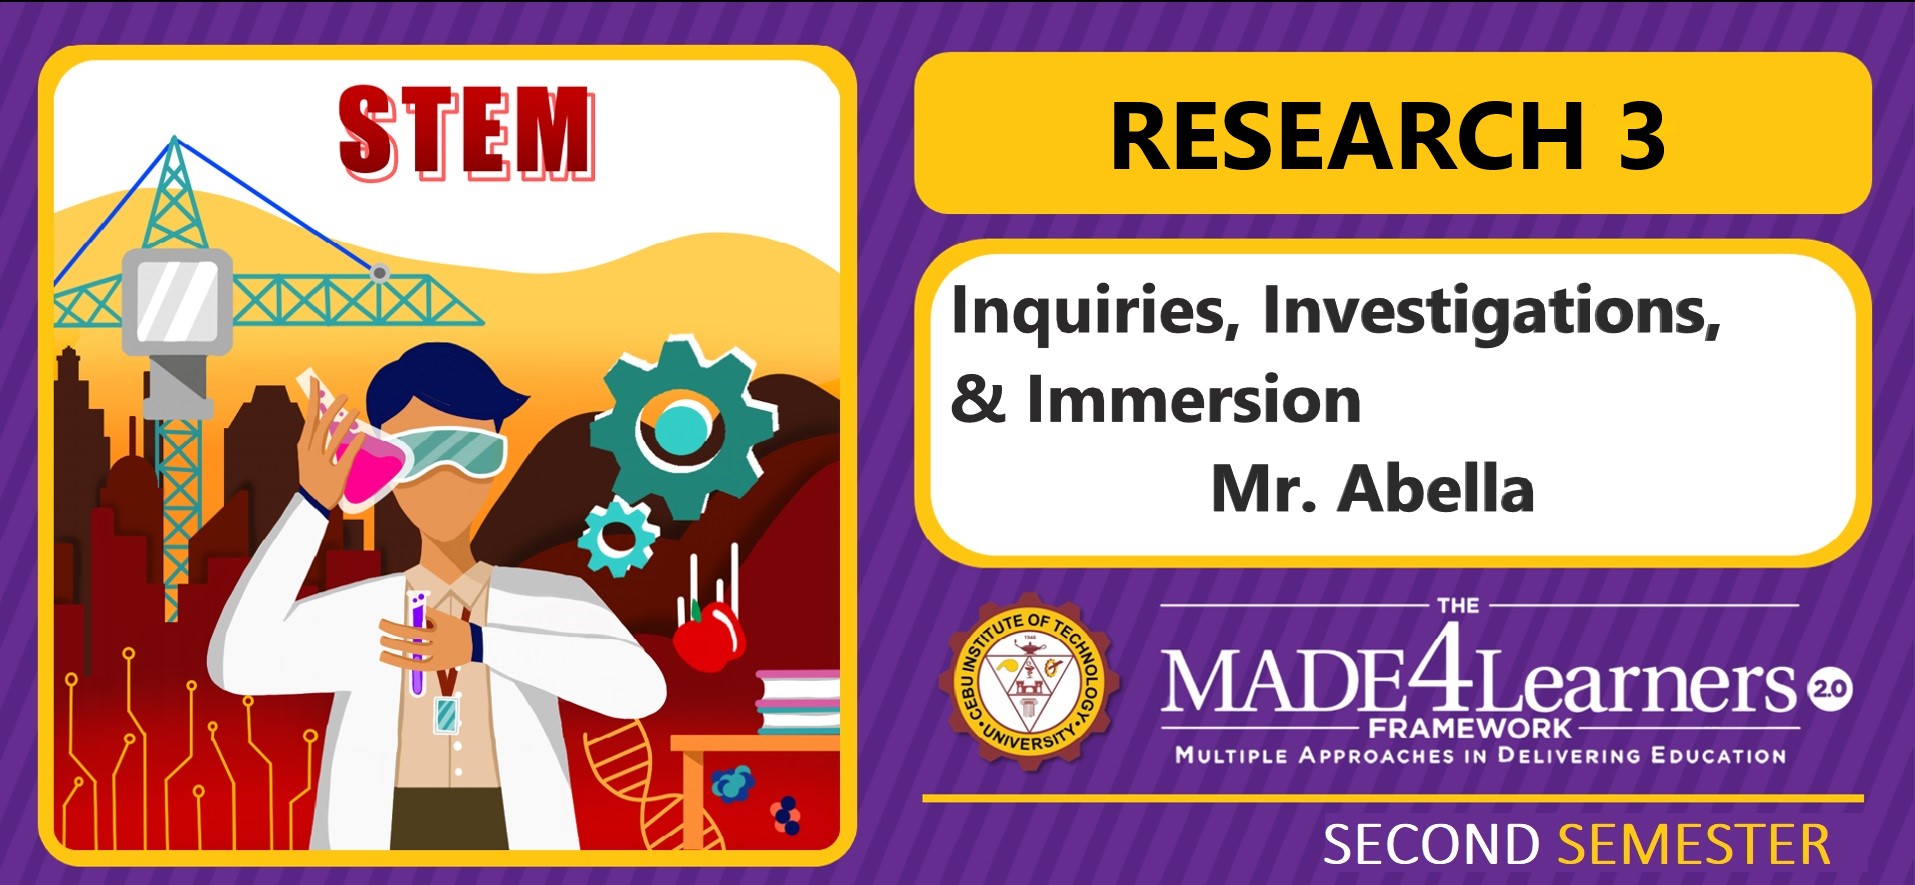 RES3: Research Inquiries, Investigation and Immersion (Abella)